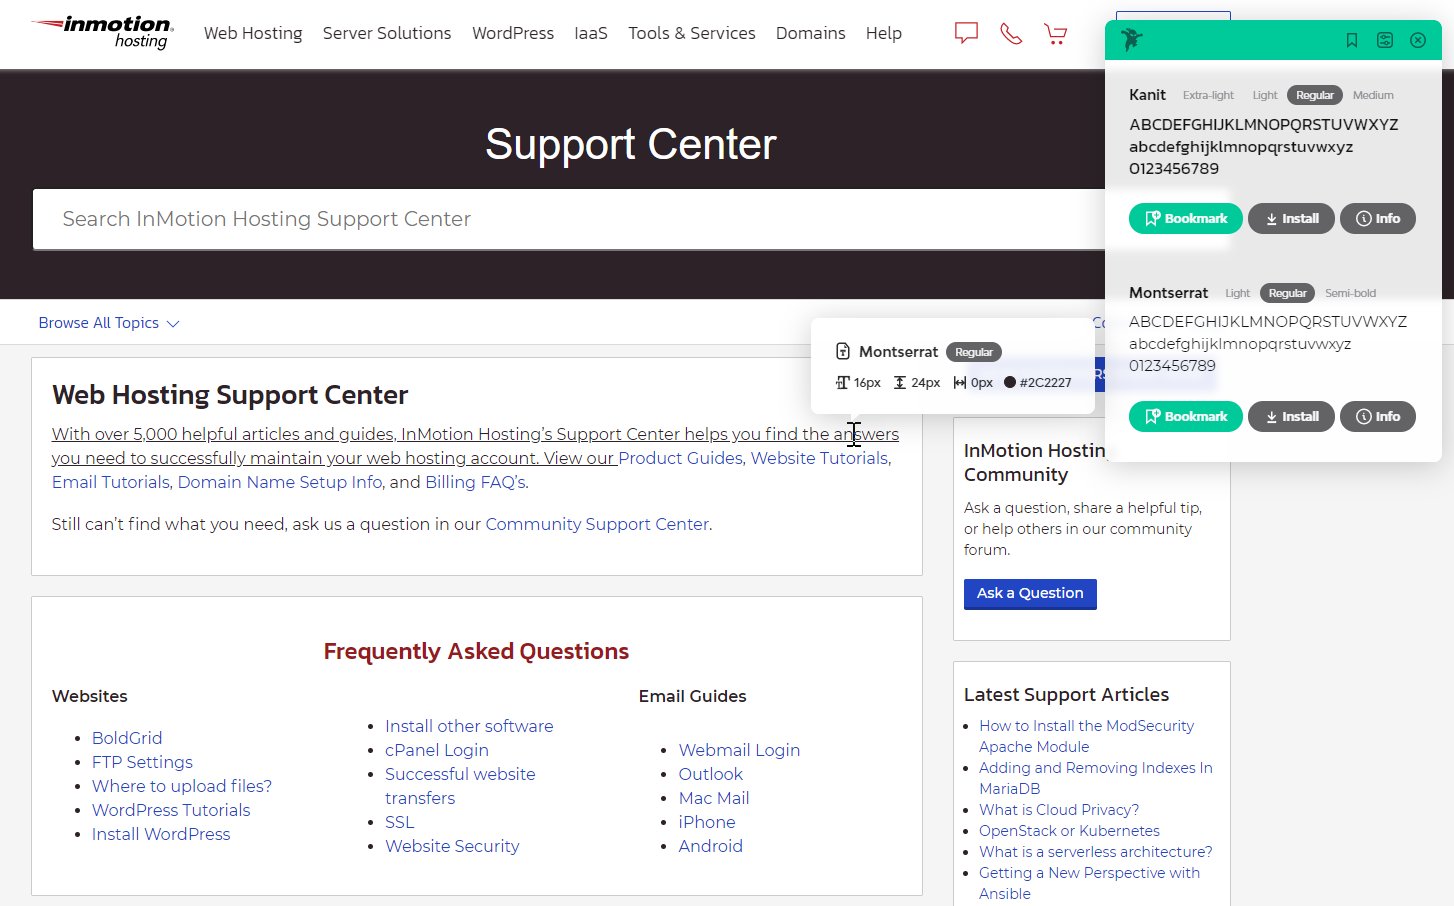 What’s New: InMotion Support Center Updates